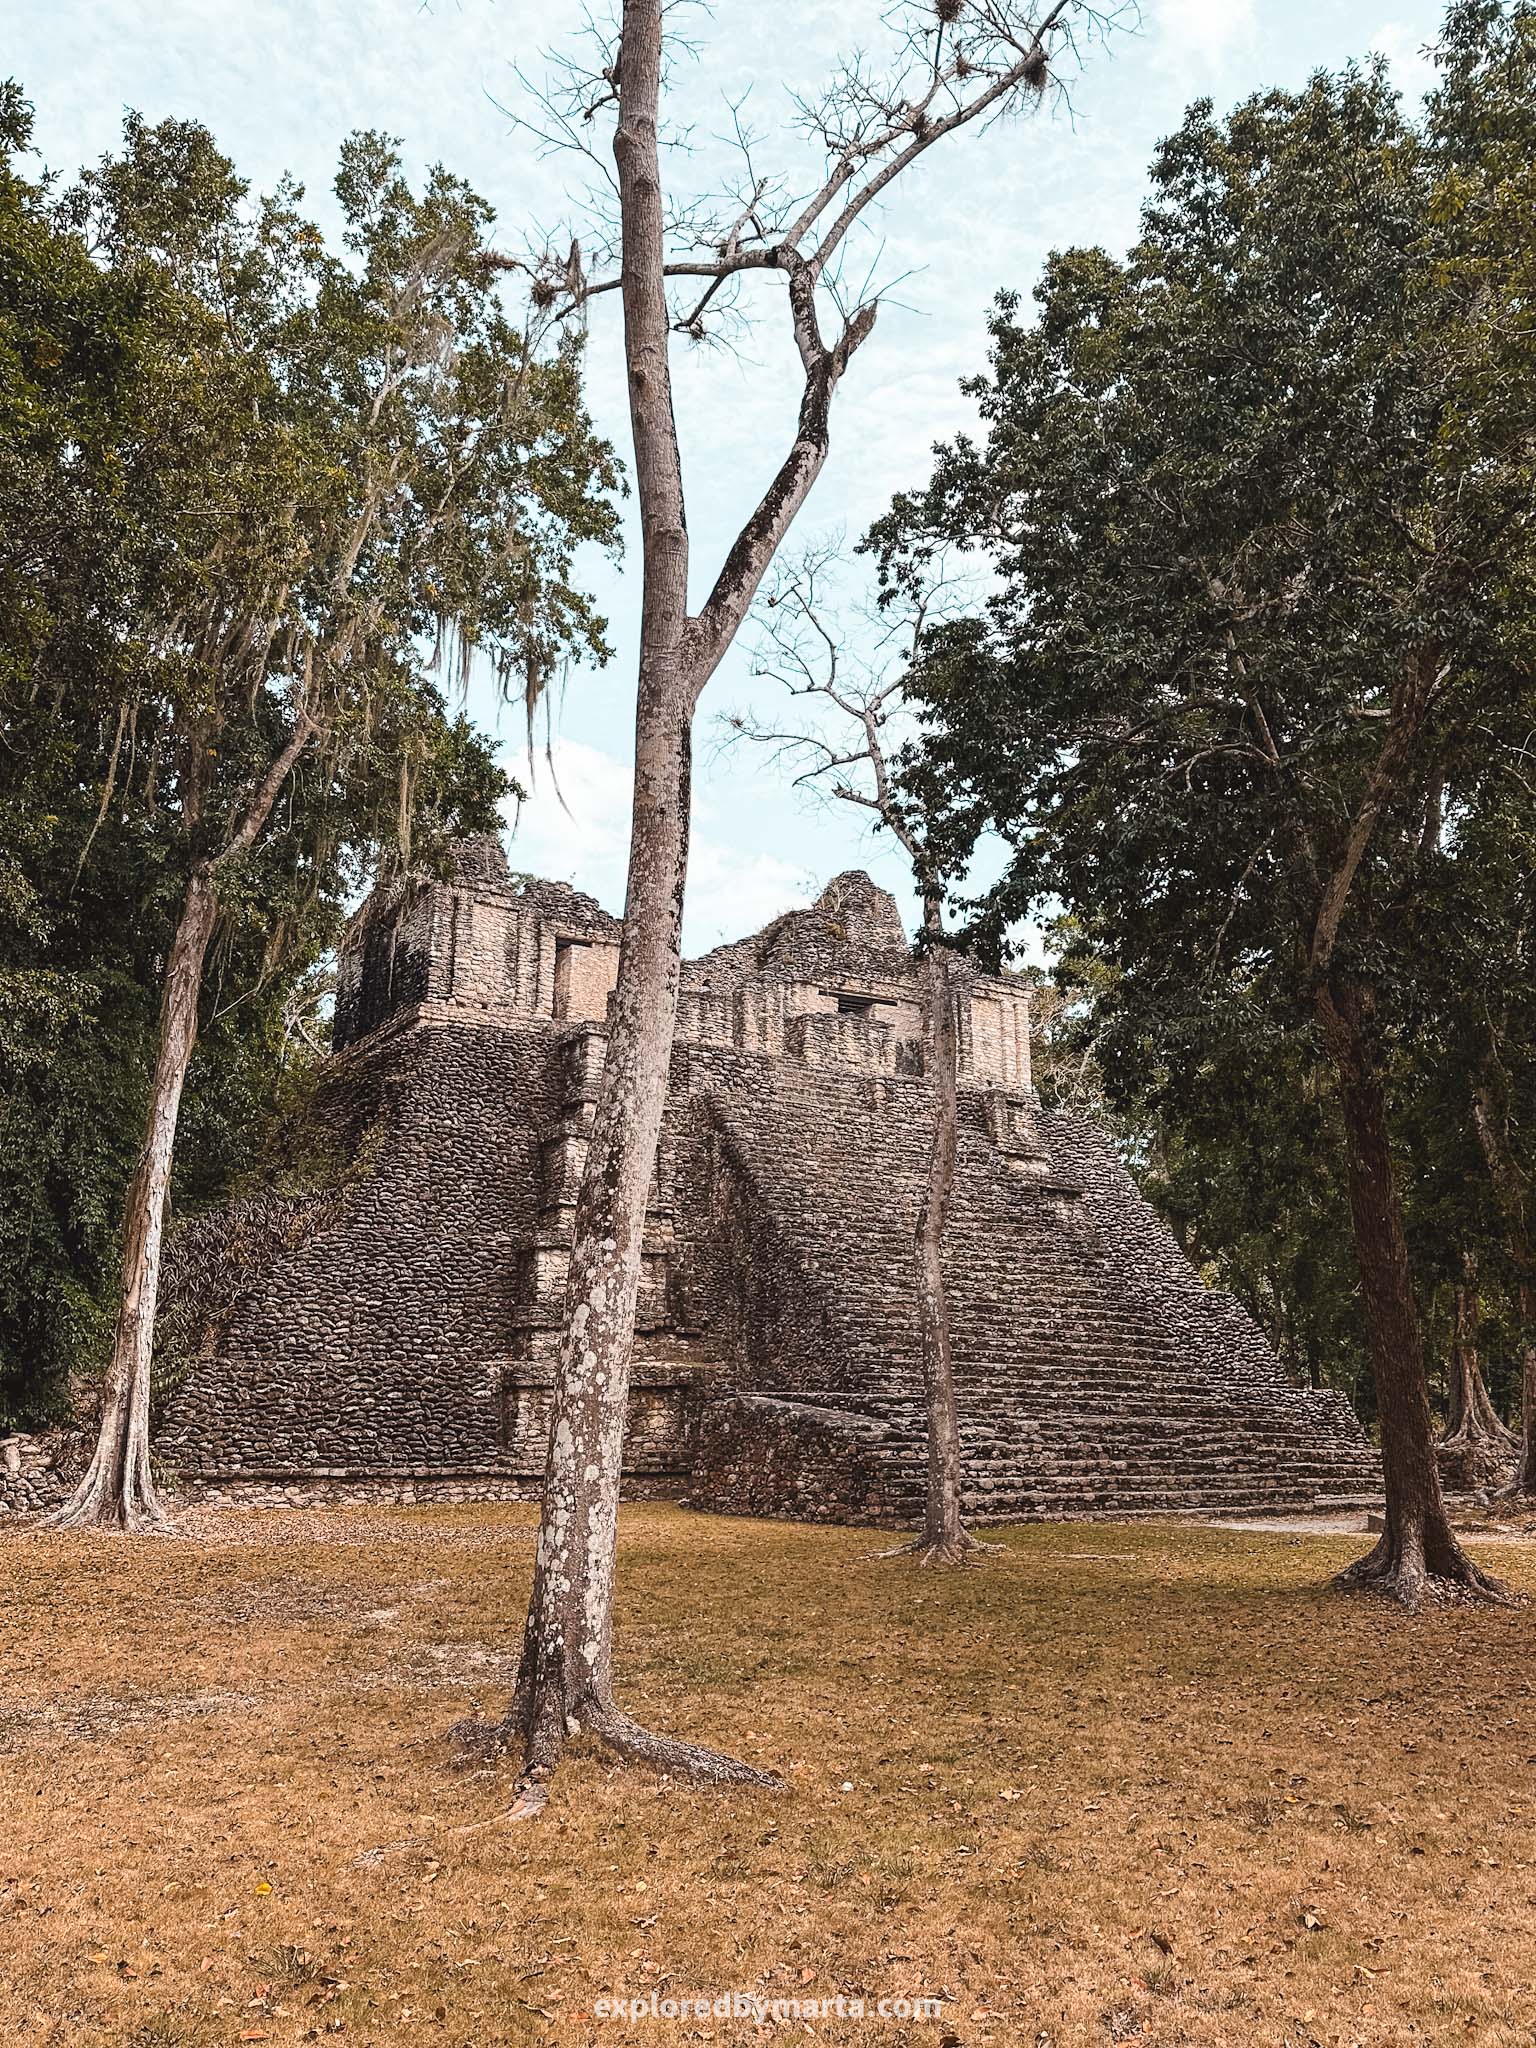 Dzibanché Archaeological Zone in Quintana Roo, Mexico